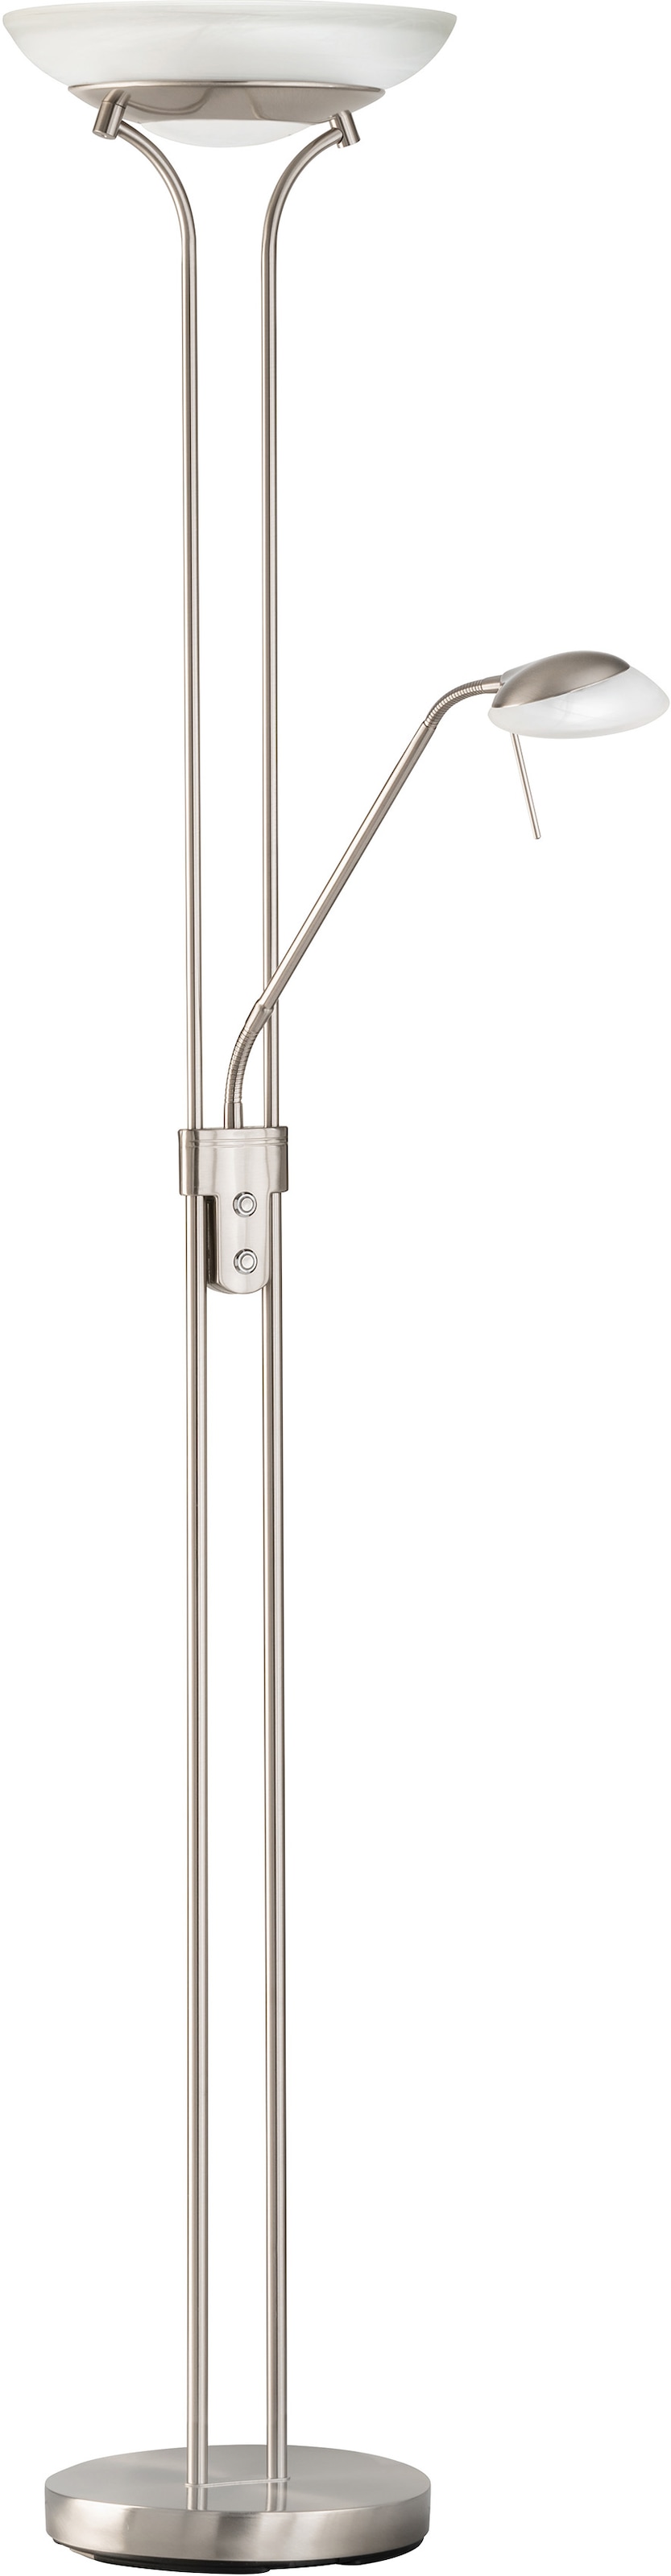 FISCHER & HONSEL TW«, LED flammig-flammig bei »Pool 1 OTTO Stehlampe